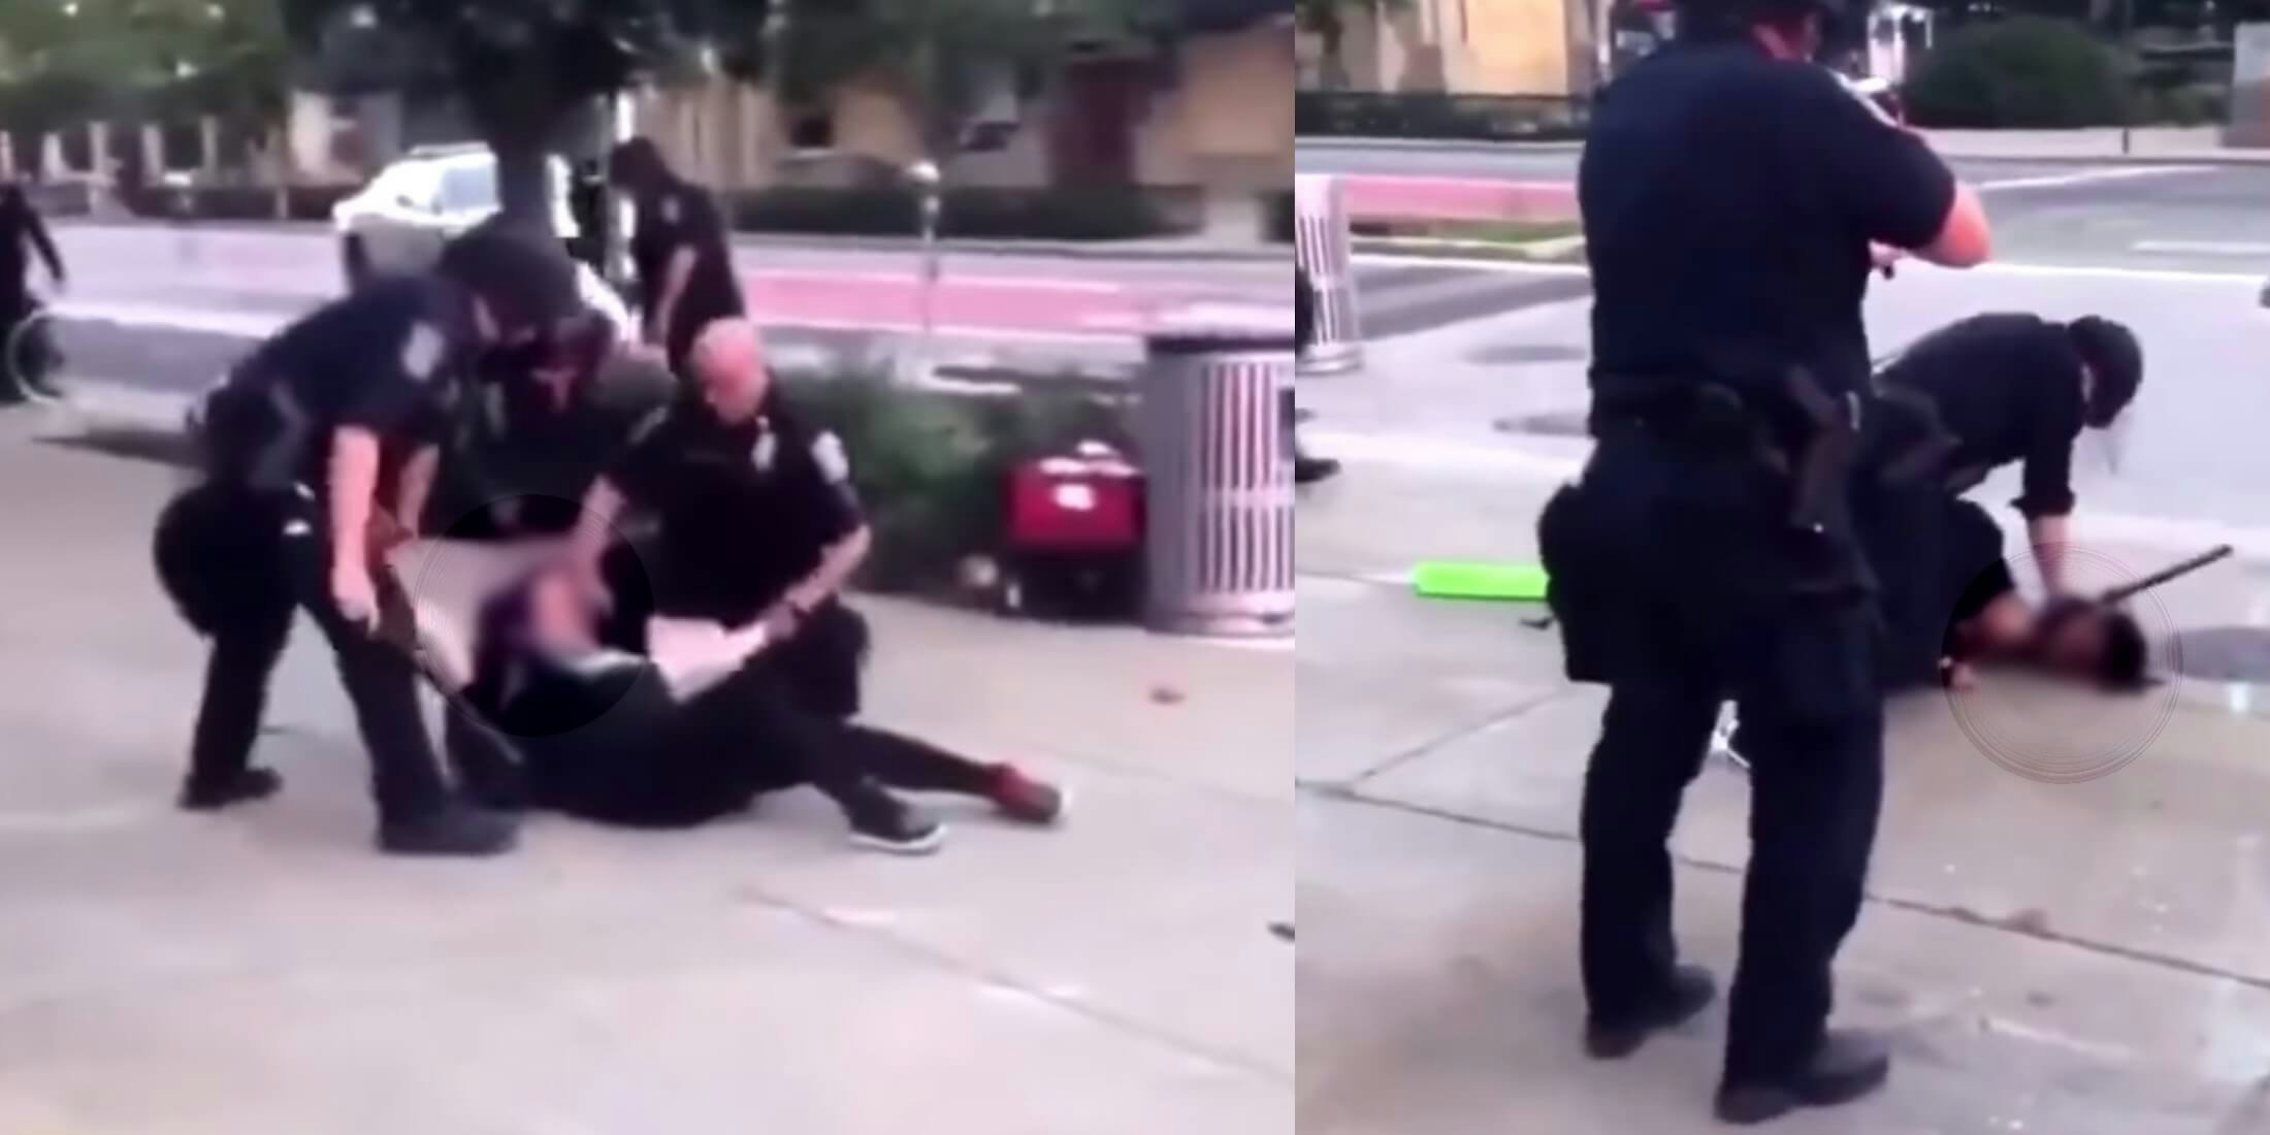 Screenshots show Indianapolis Police assaulting two women